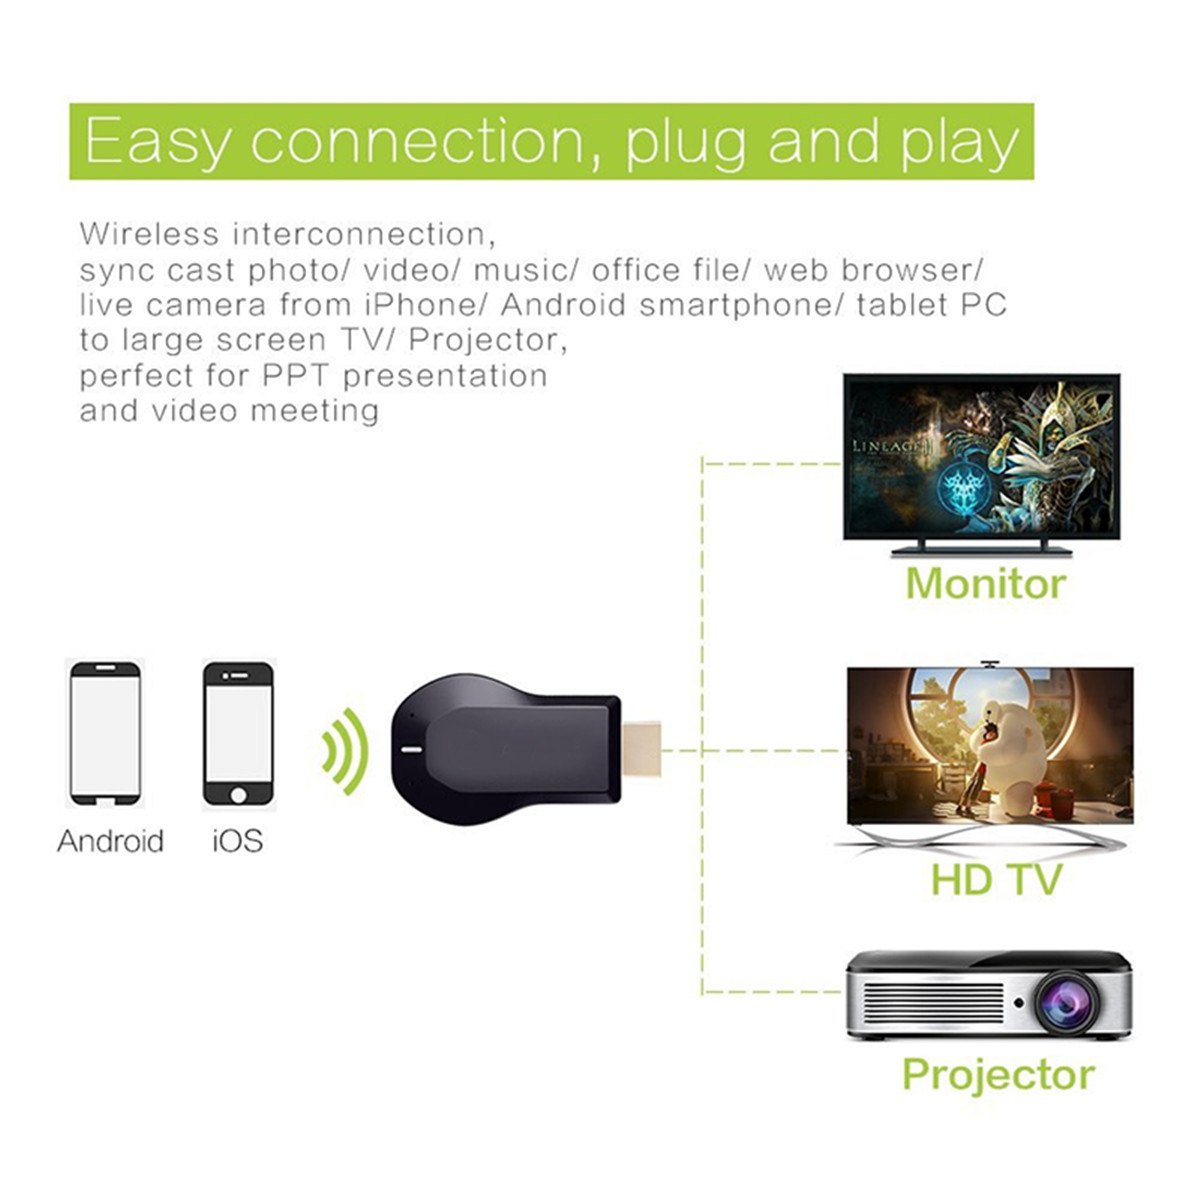 Miracast-M2-HD-1080P-Plus-WiFi-Display-Dongle-Miracast-TV-Dongle-DLNA-982127